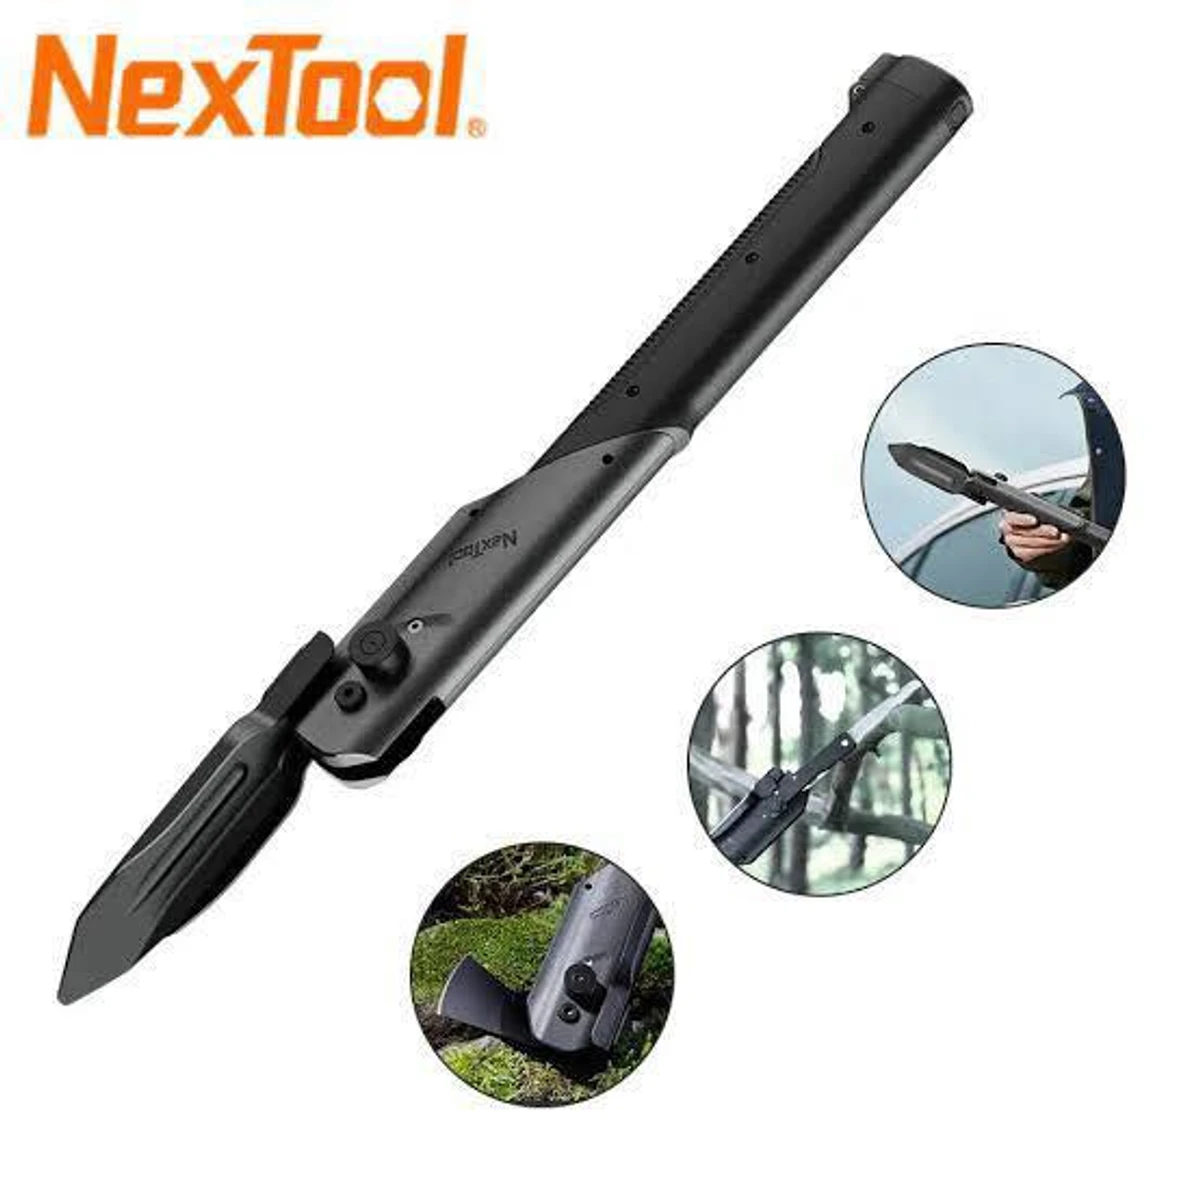 Outdoor Multi-function Small Hand Shovel Stainless Steel Small Shovel Camping Portable Engineer Shovel Field Survival Tool